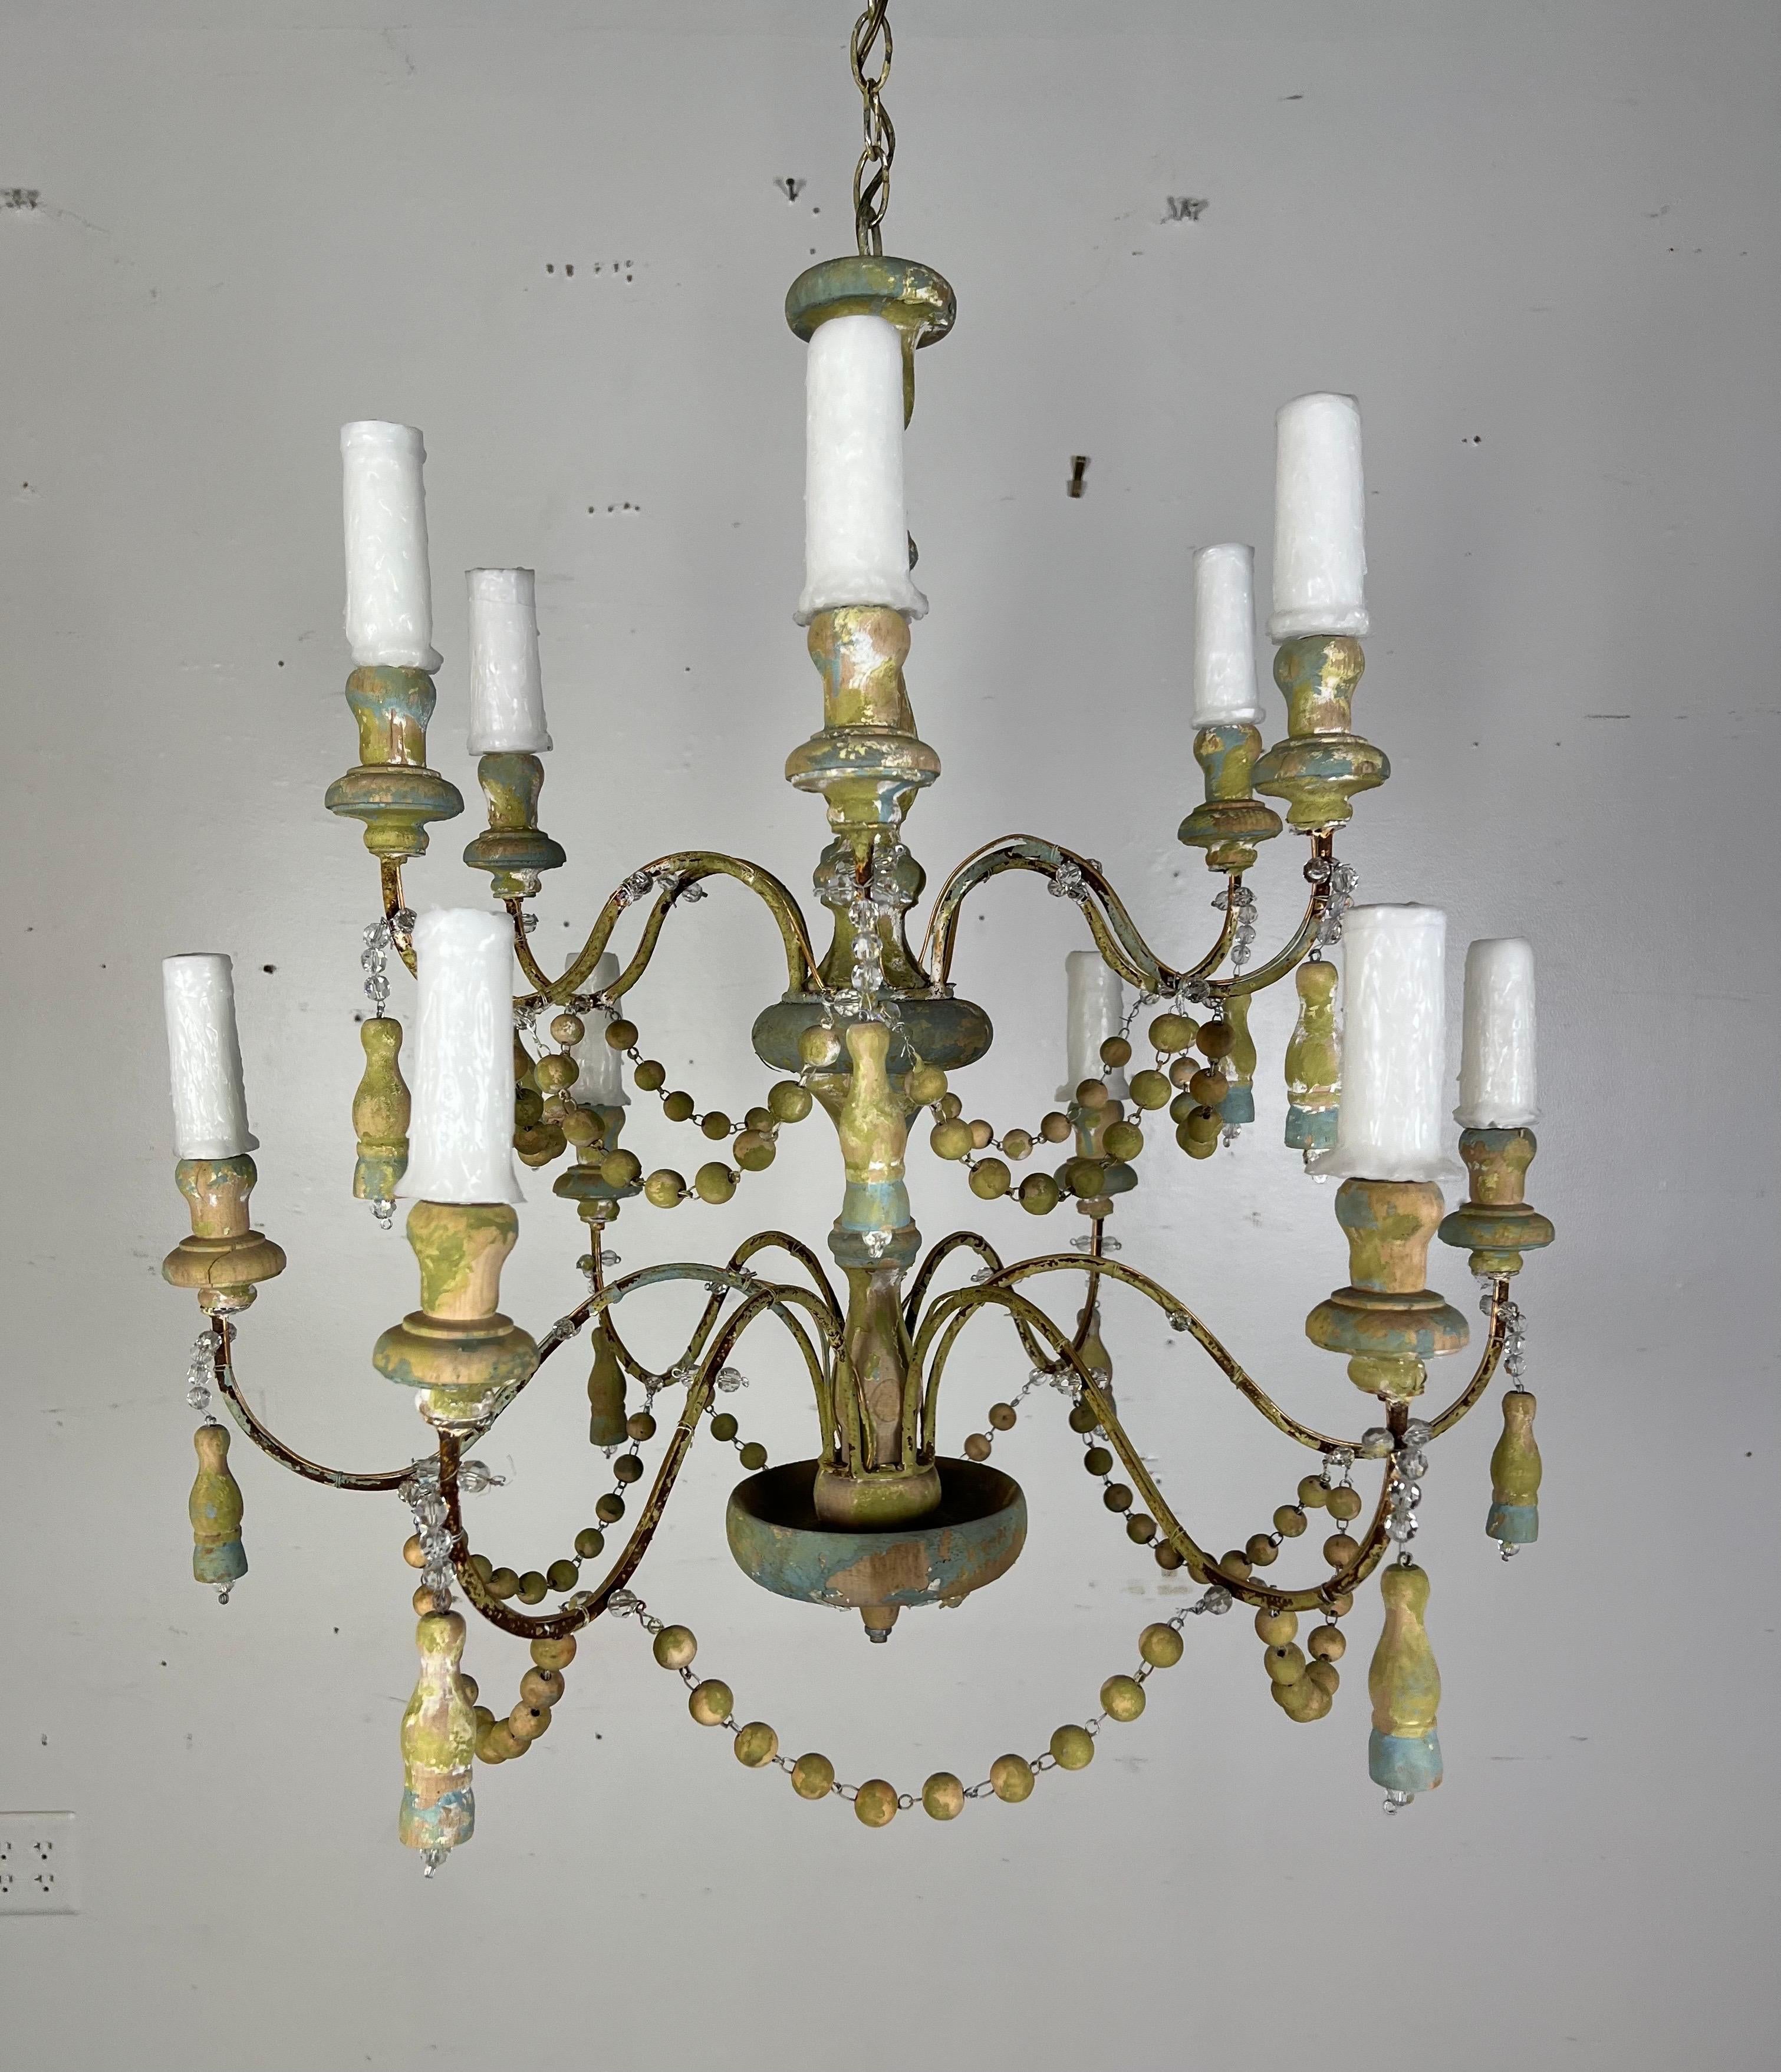 Stunning Italian painted two-tier chandelier.  This chandelier, with its multiple layers, cascades light elegantly through beaded garlands that drape between each tier.

Adorning this chandelier are tassels that hang gracefully, adding a sense of